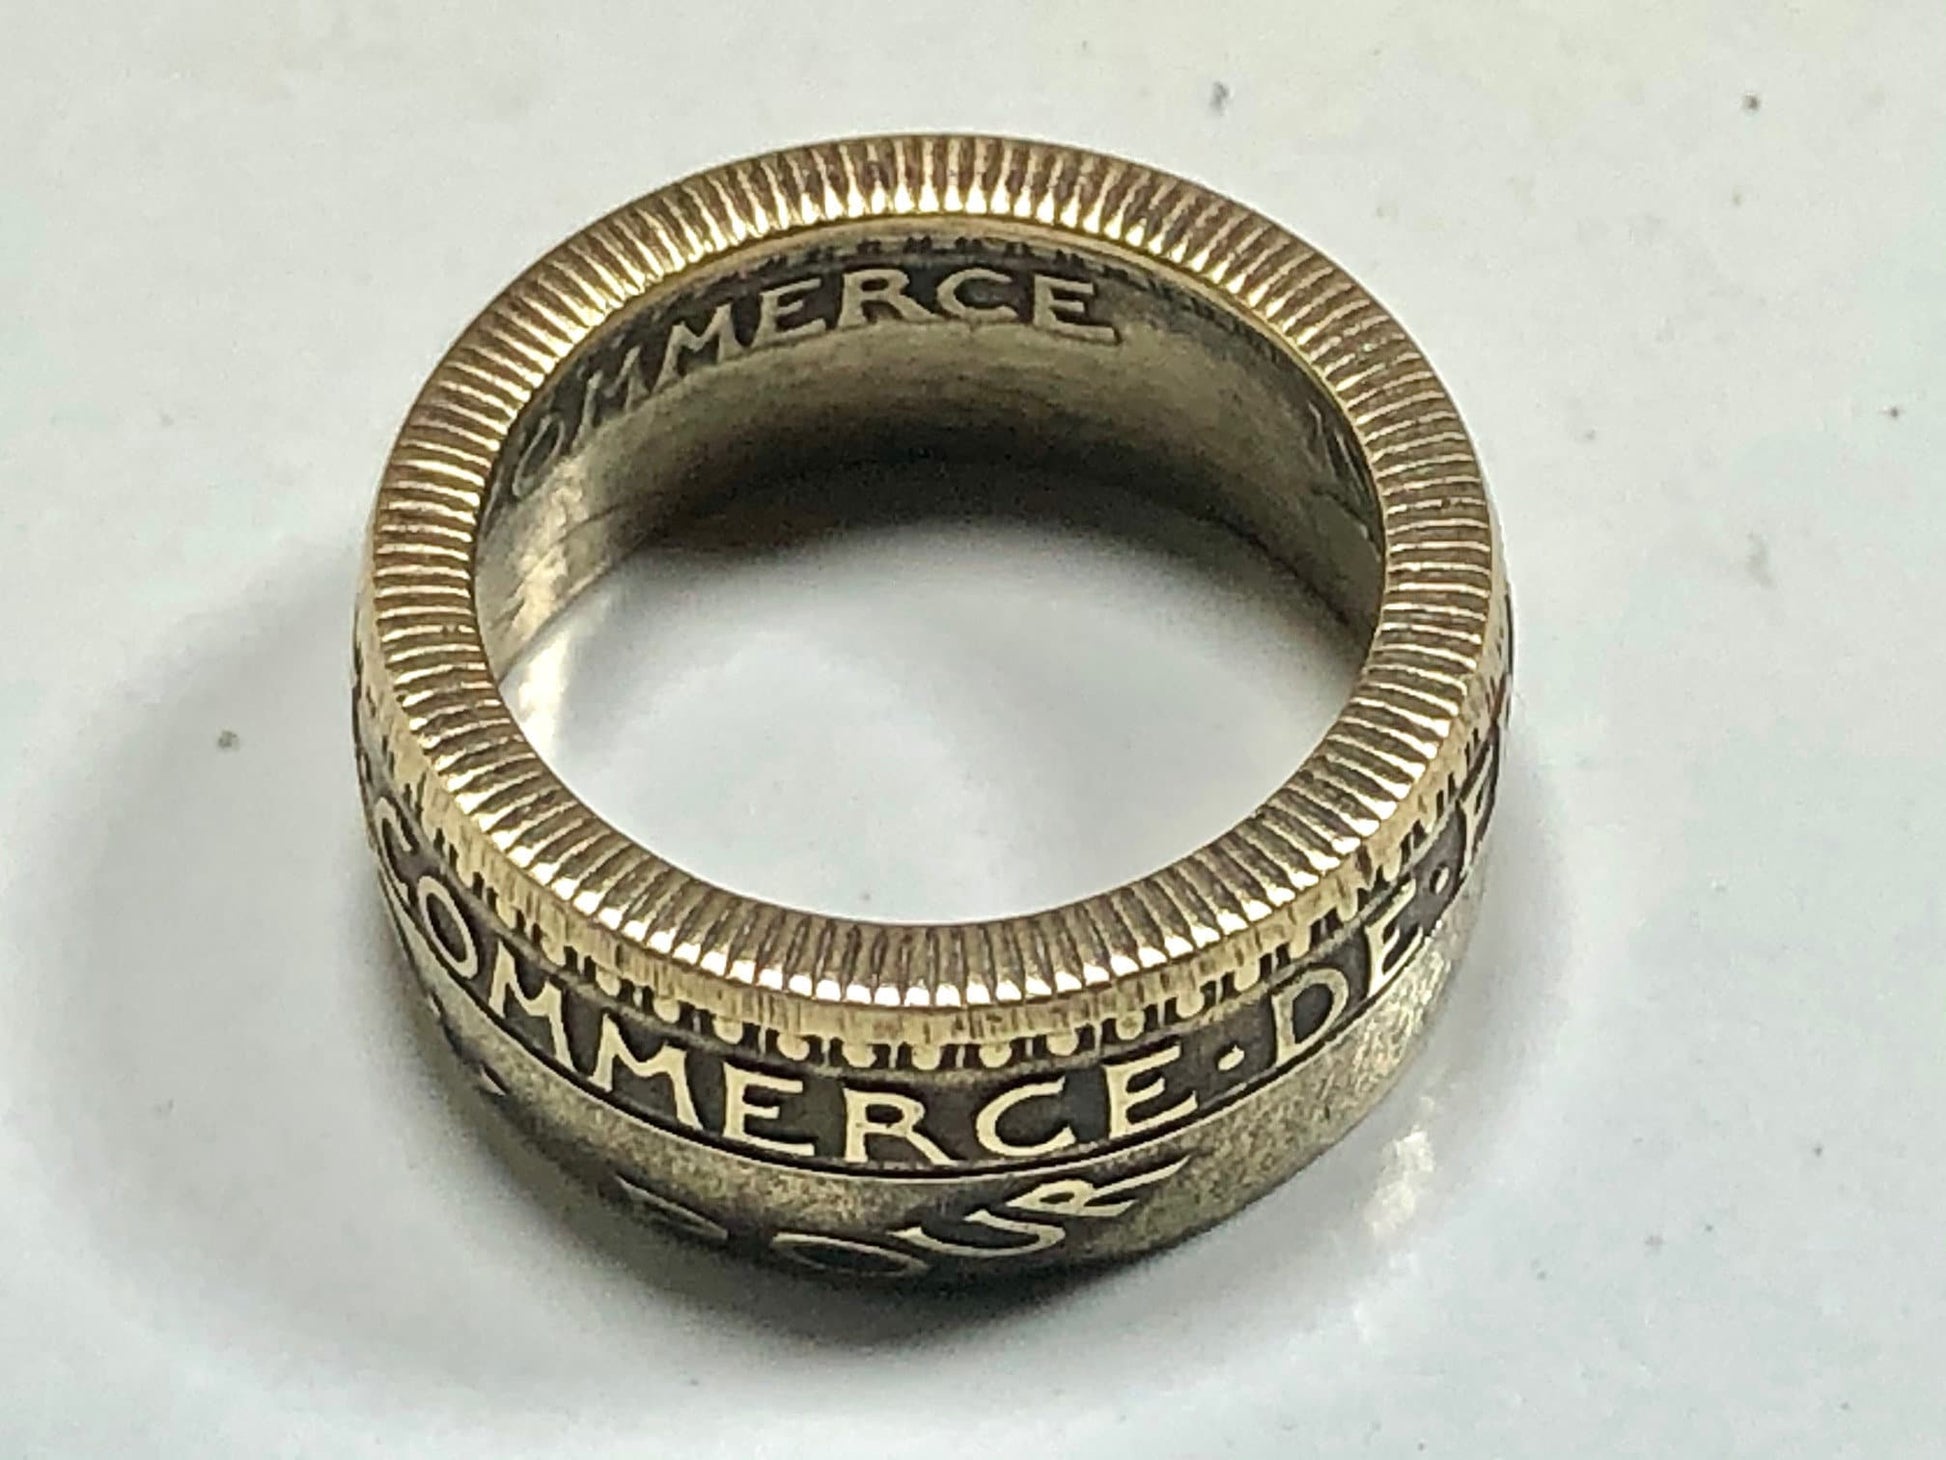 France Ring 2 Francs Chamber of Commerce Coin Ring Handmade Personal Jewelry Ring Gift For Friend Coin Ring For Him Her World Coin Collector